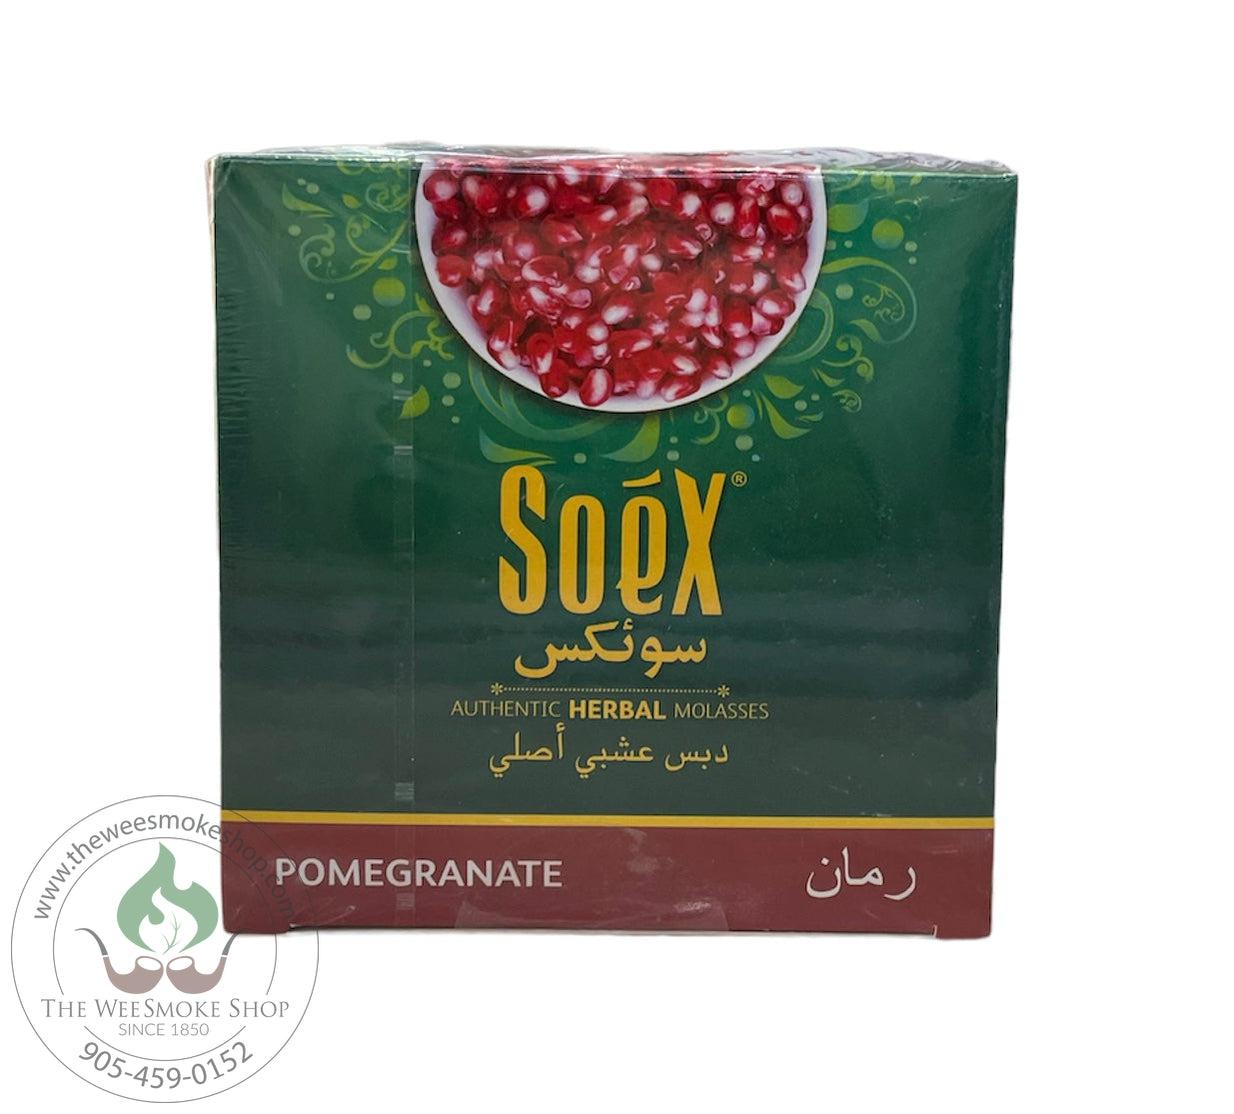 Pomegranate Soex Herbal Molasses (250g)-Hookah accessories-The Wee Smoke Shop